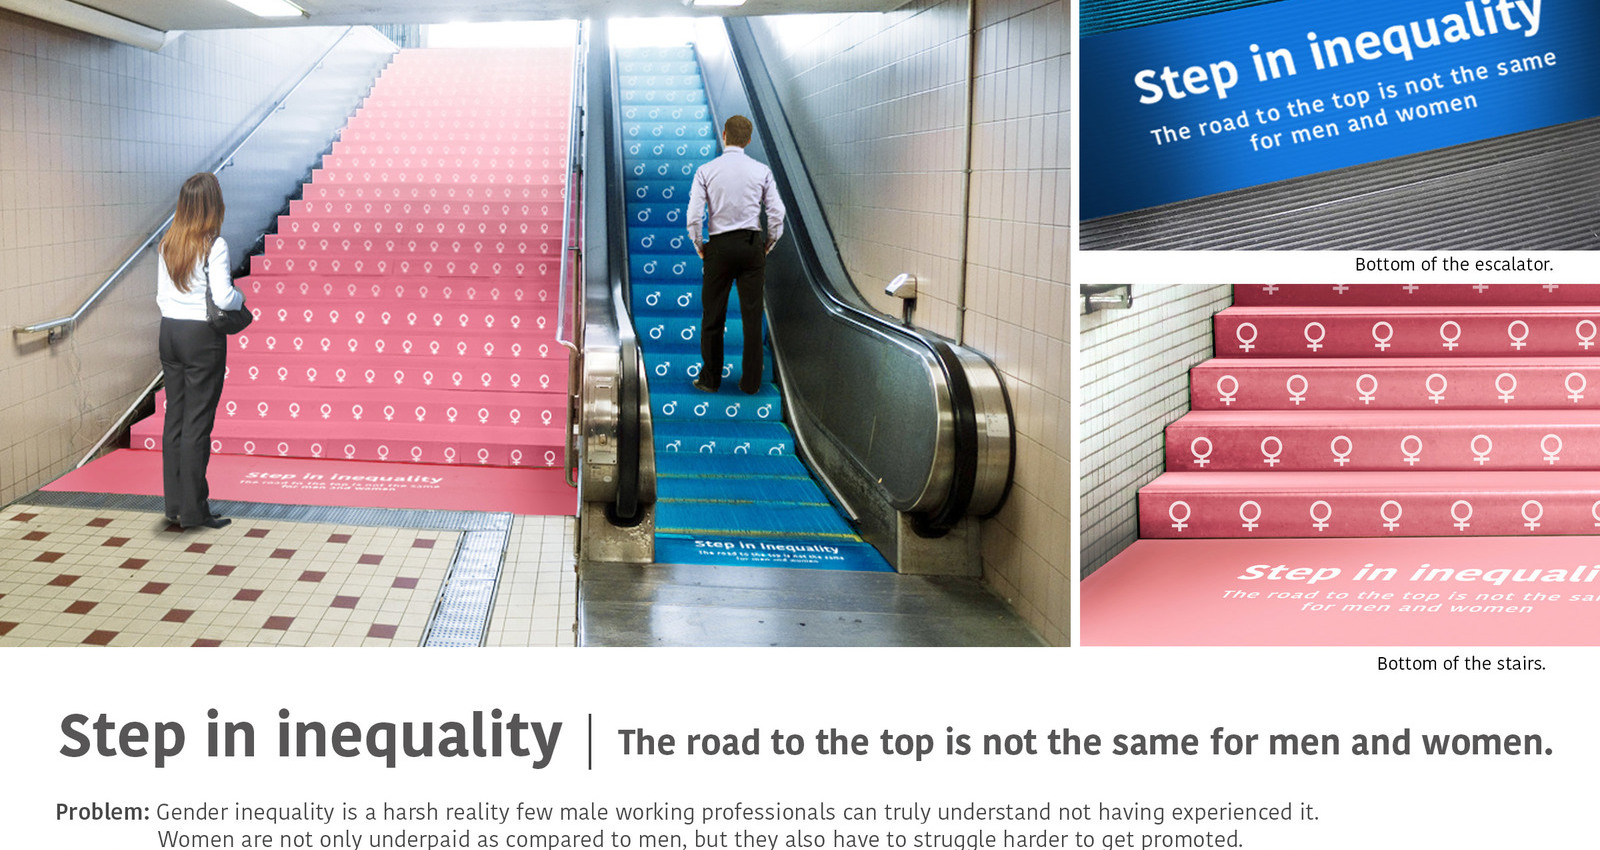 Step in inequality